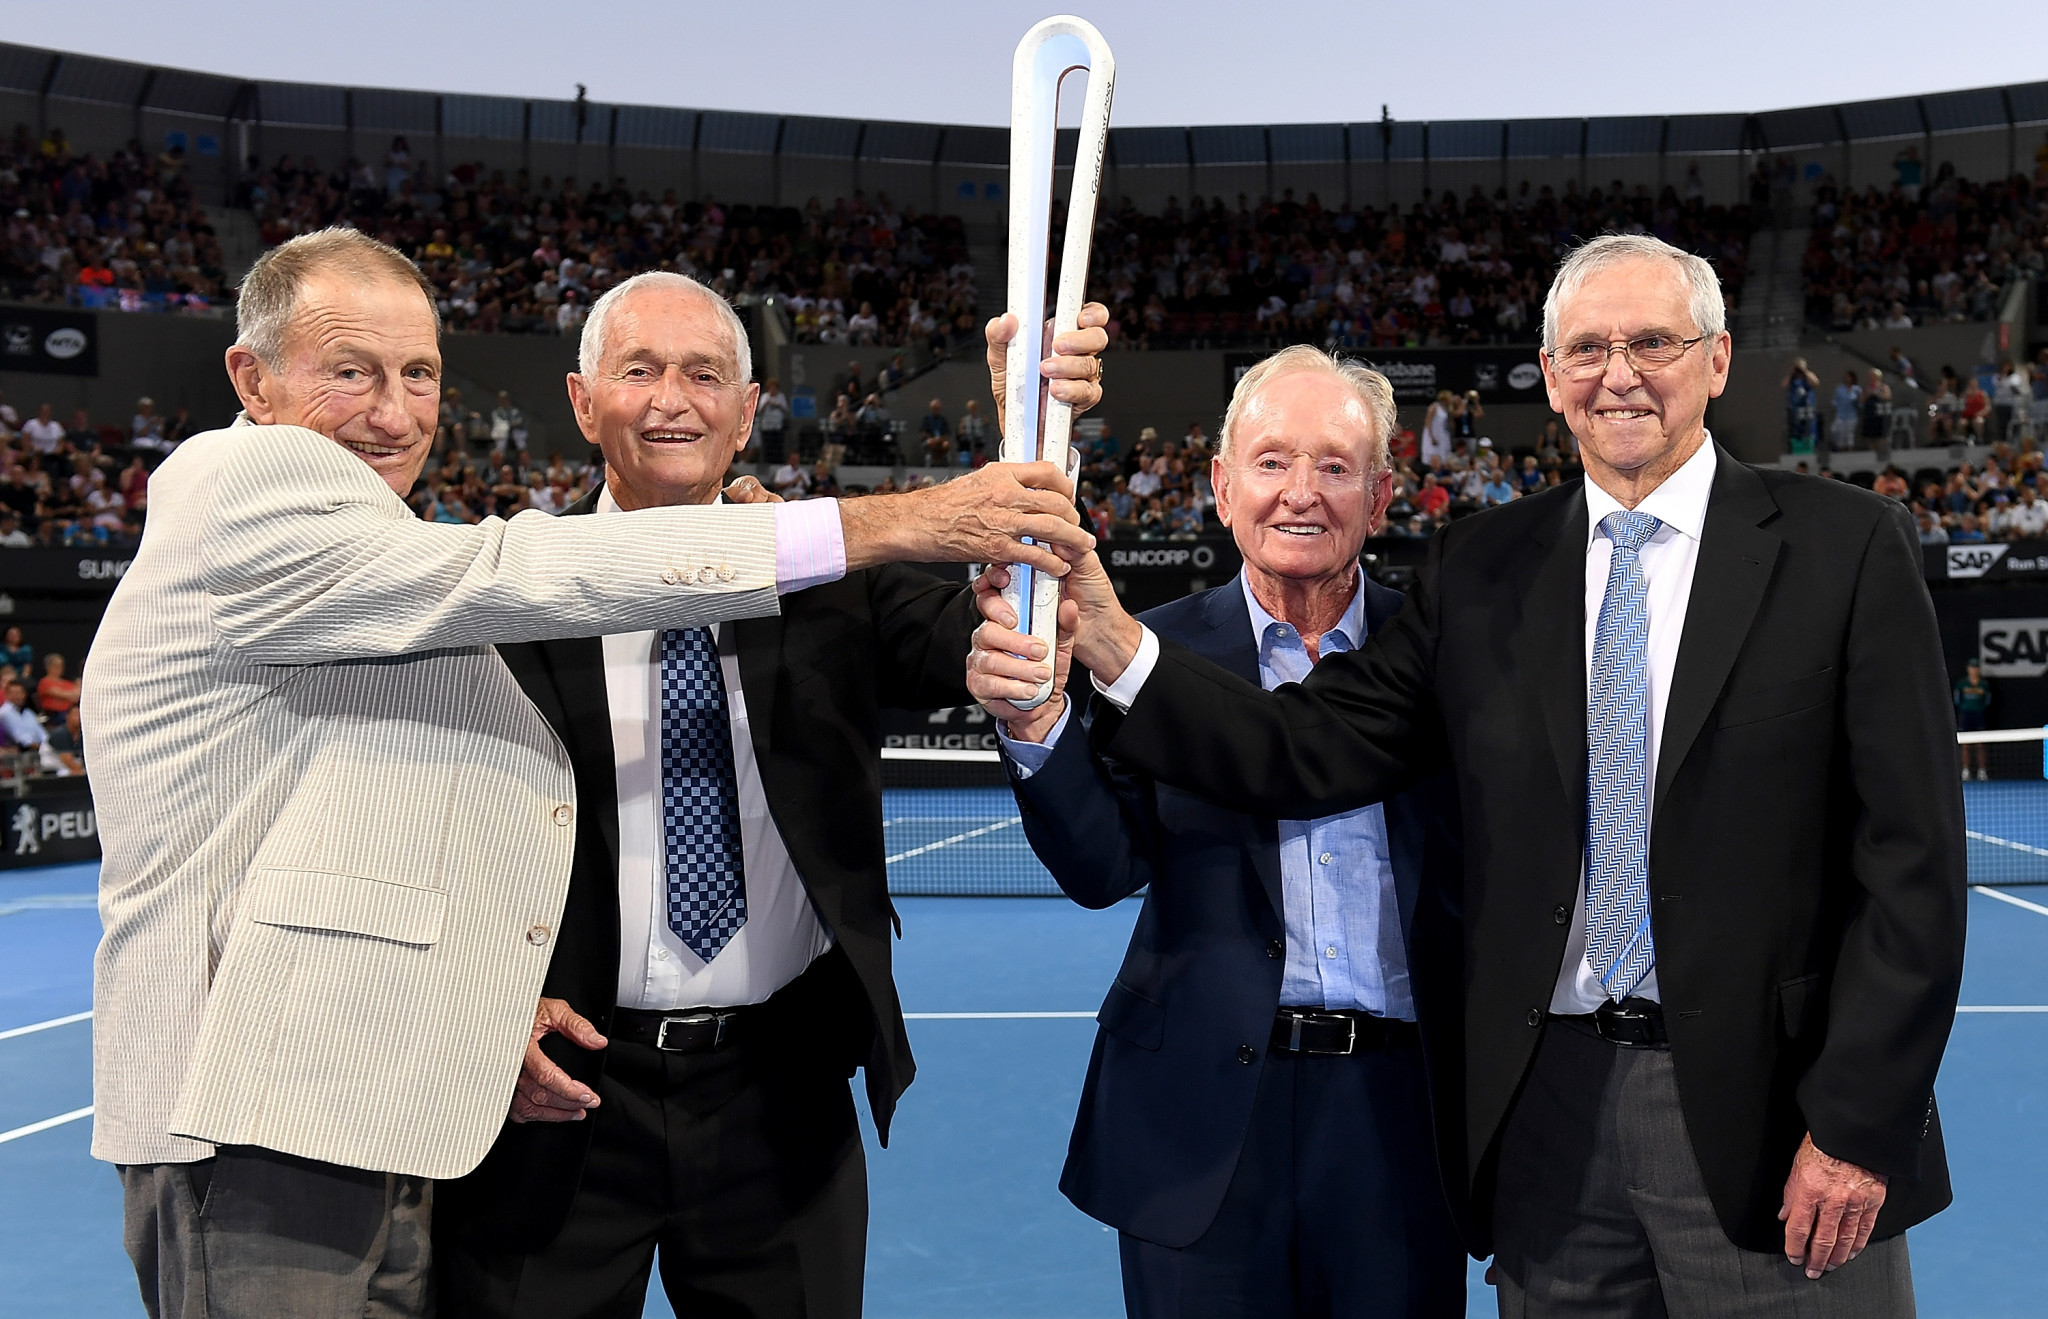 Ashley Cooper, Mal Anderson, Rod Laver and Roy Emerson posed with the Baton ©Getty Images